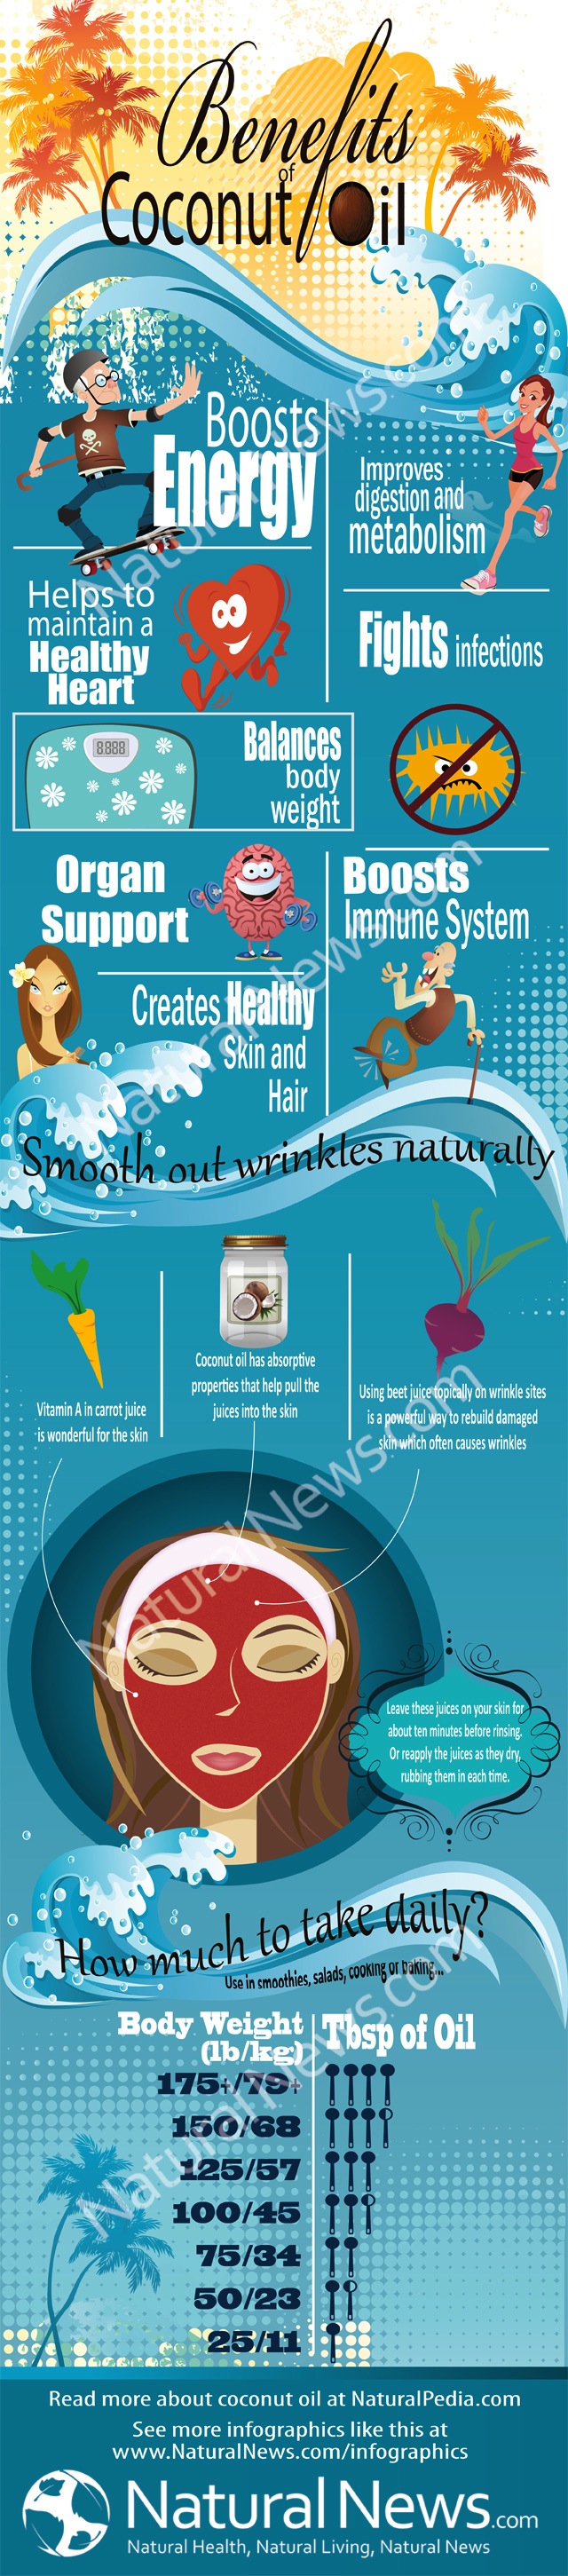 Infographic-Benefits-of-Coconut-Oil